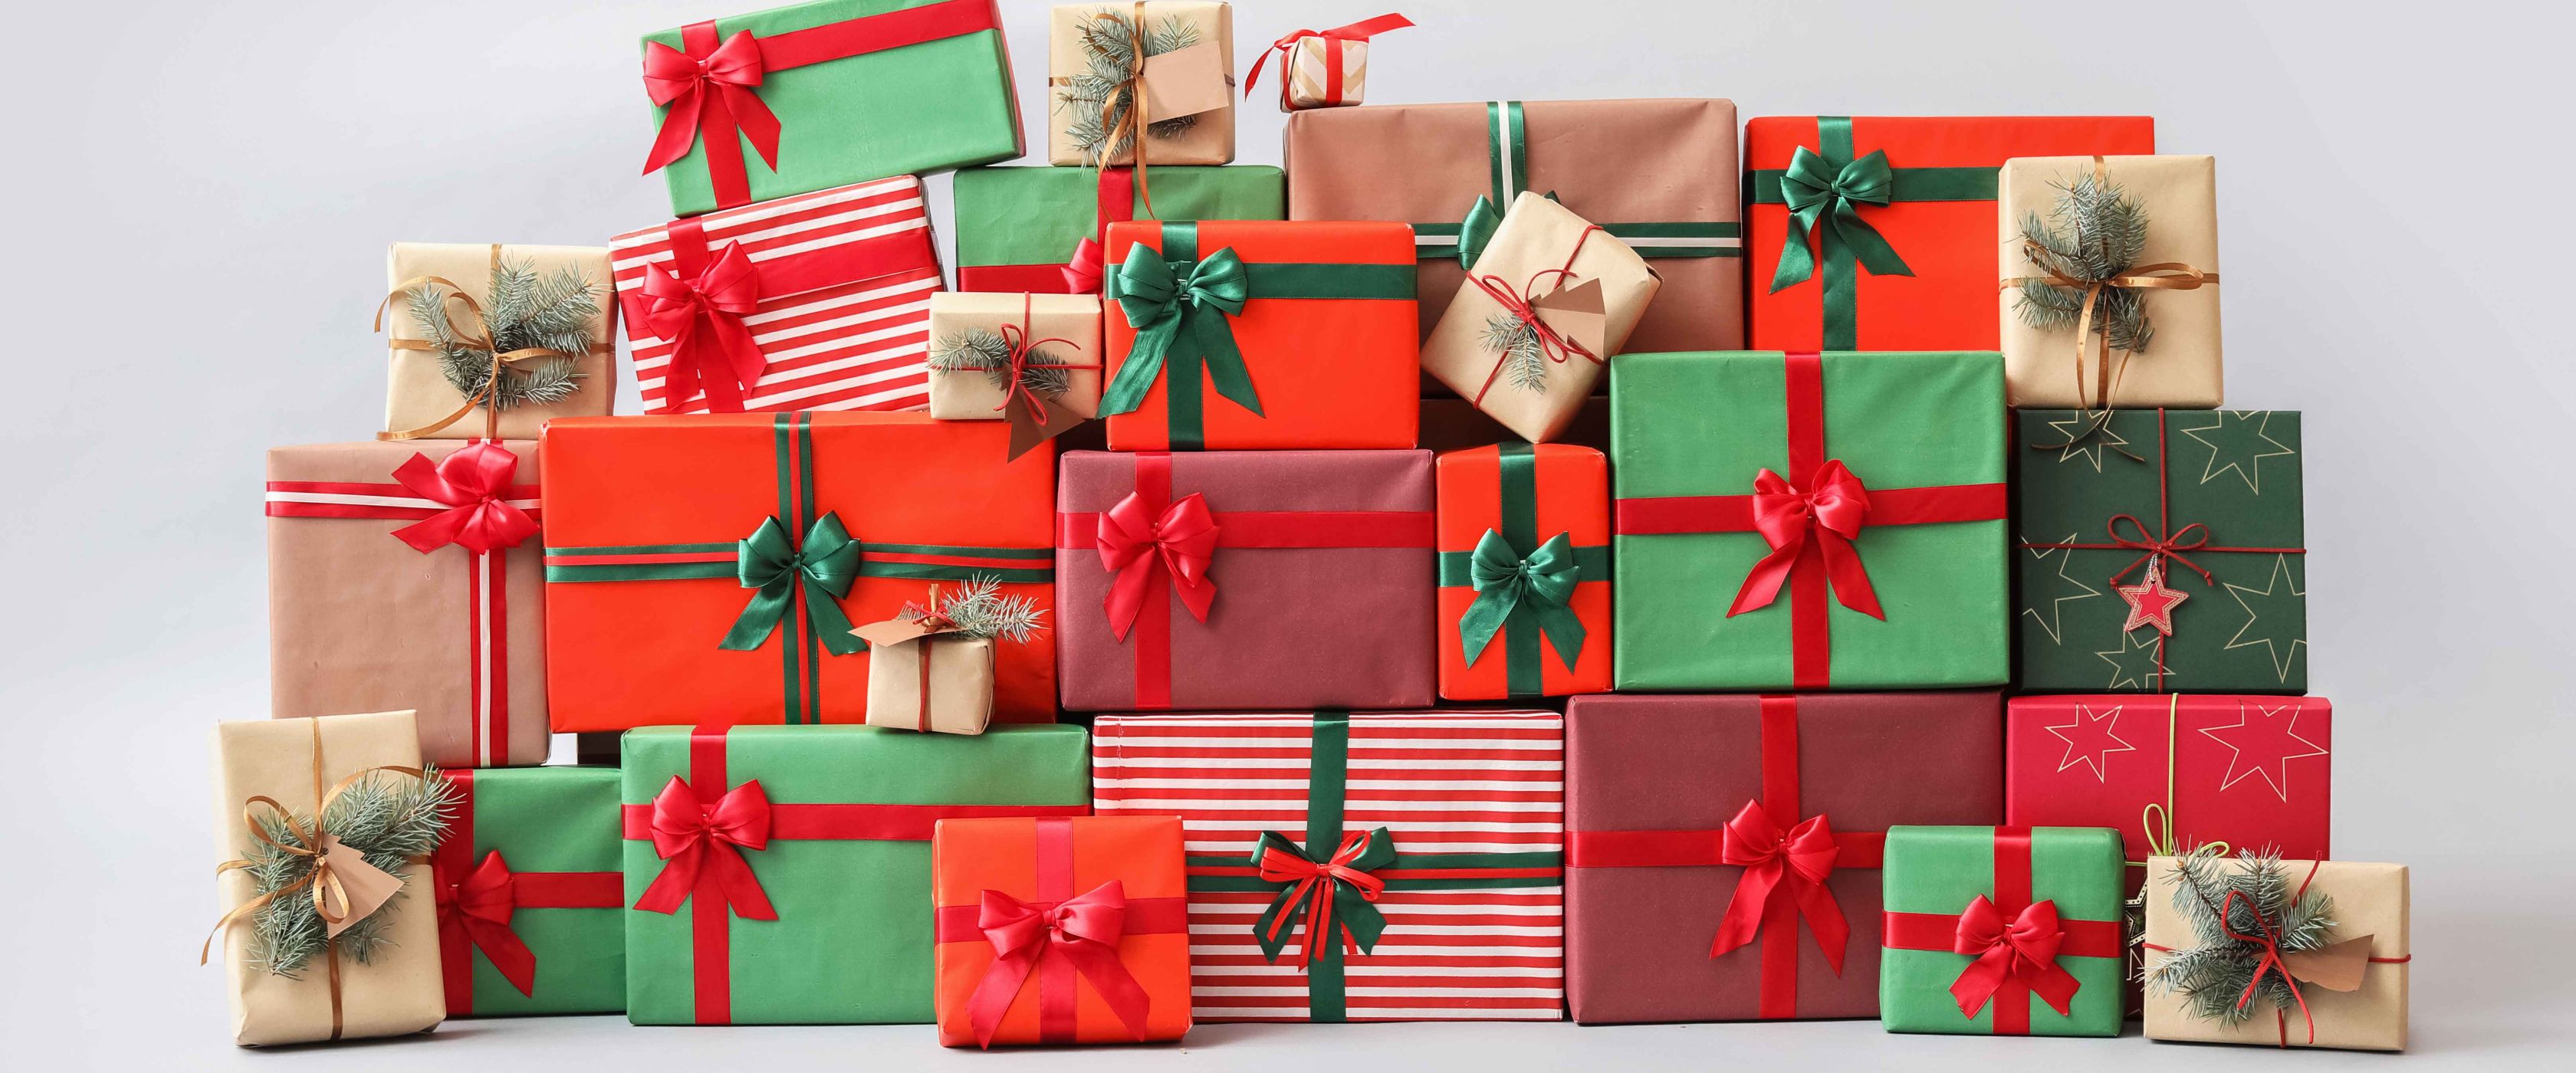 Presents in red and green